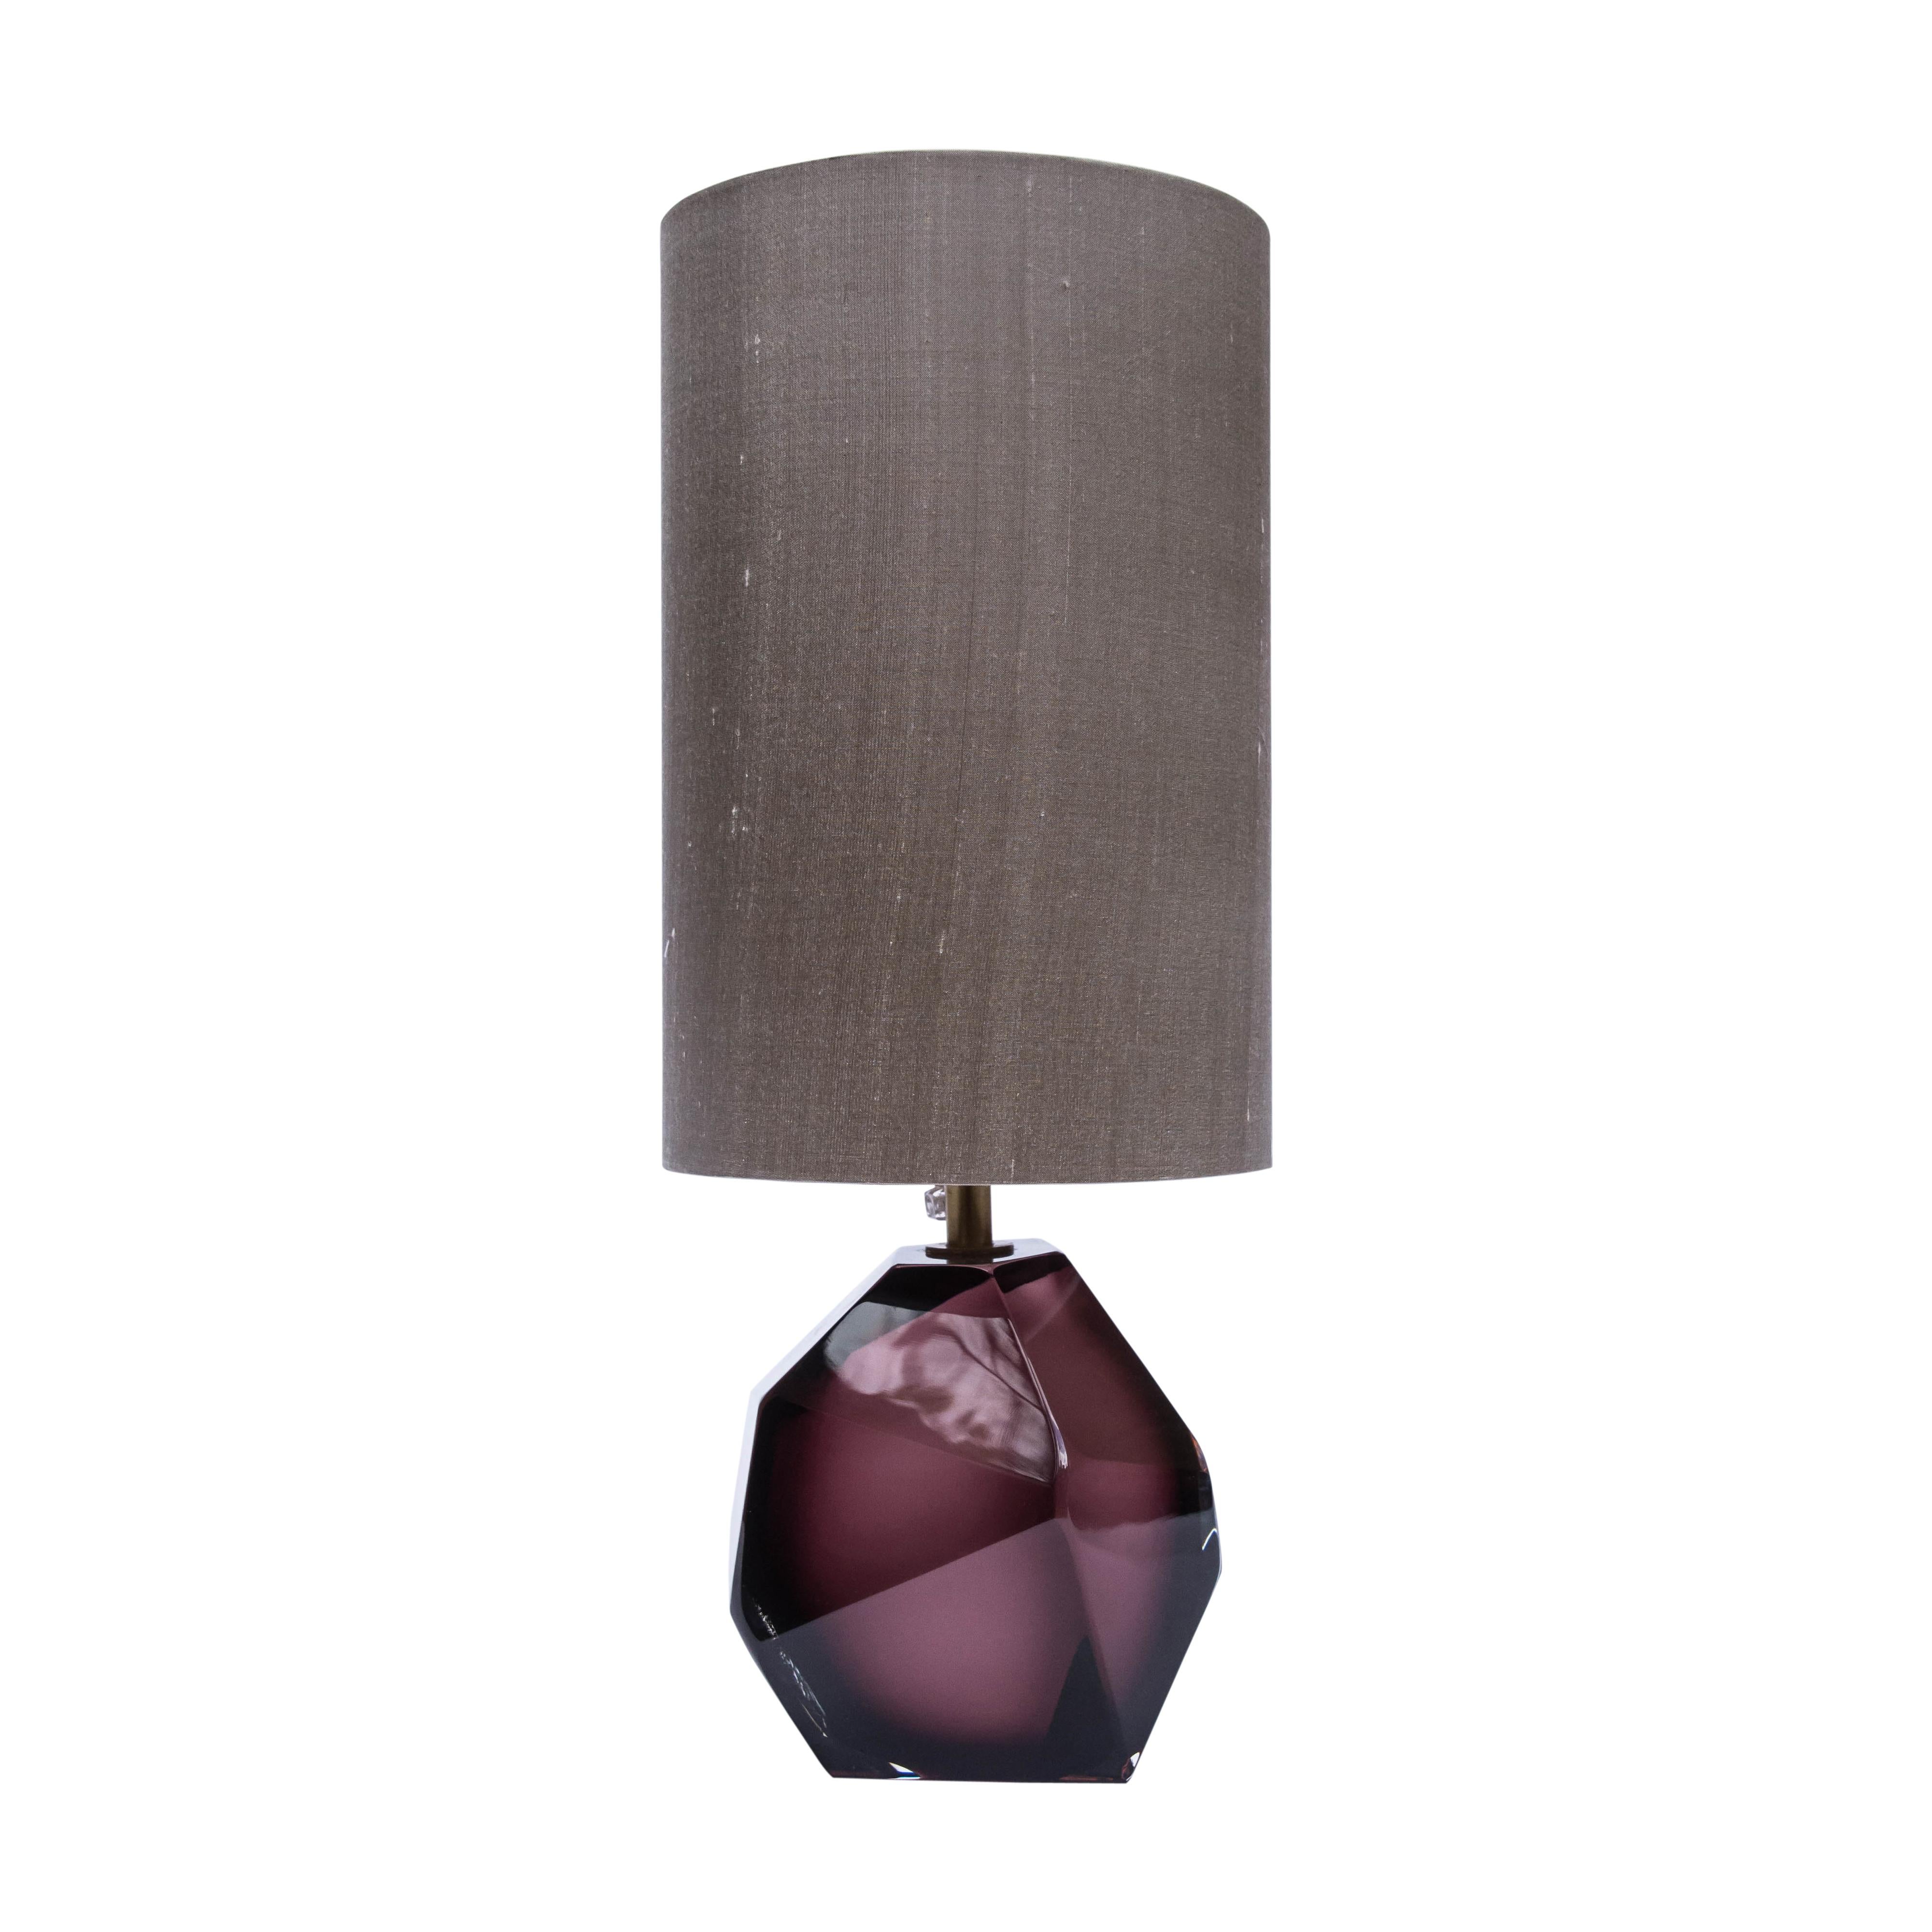 A beautiful and precious pair of Murano diamond cut faceted hand worked purple glass Table Lamps with a brass stem .
Italian modern design and manufacturing by Alberto Dona 
Sold without lamp shade.